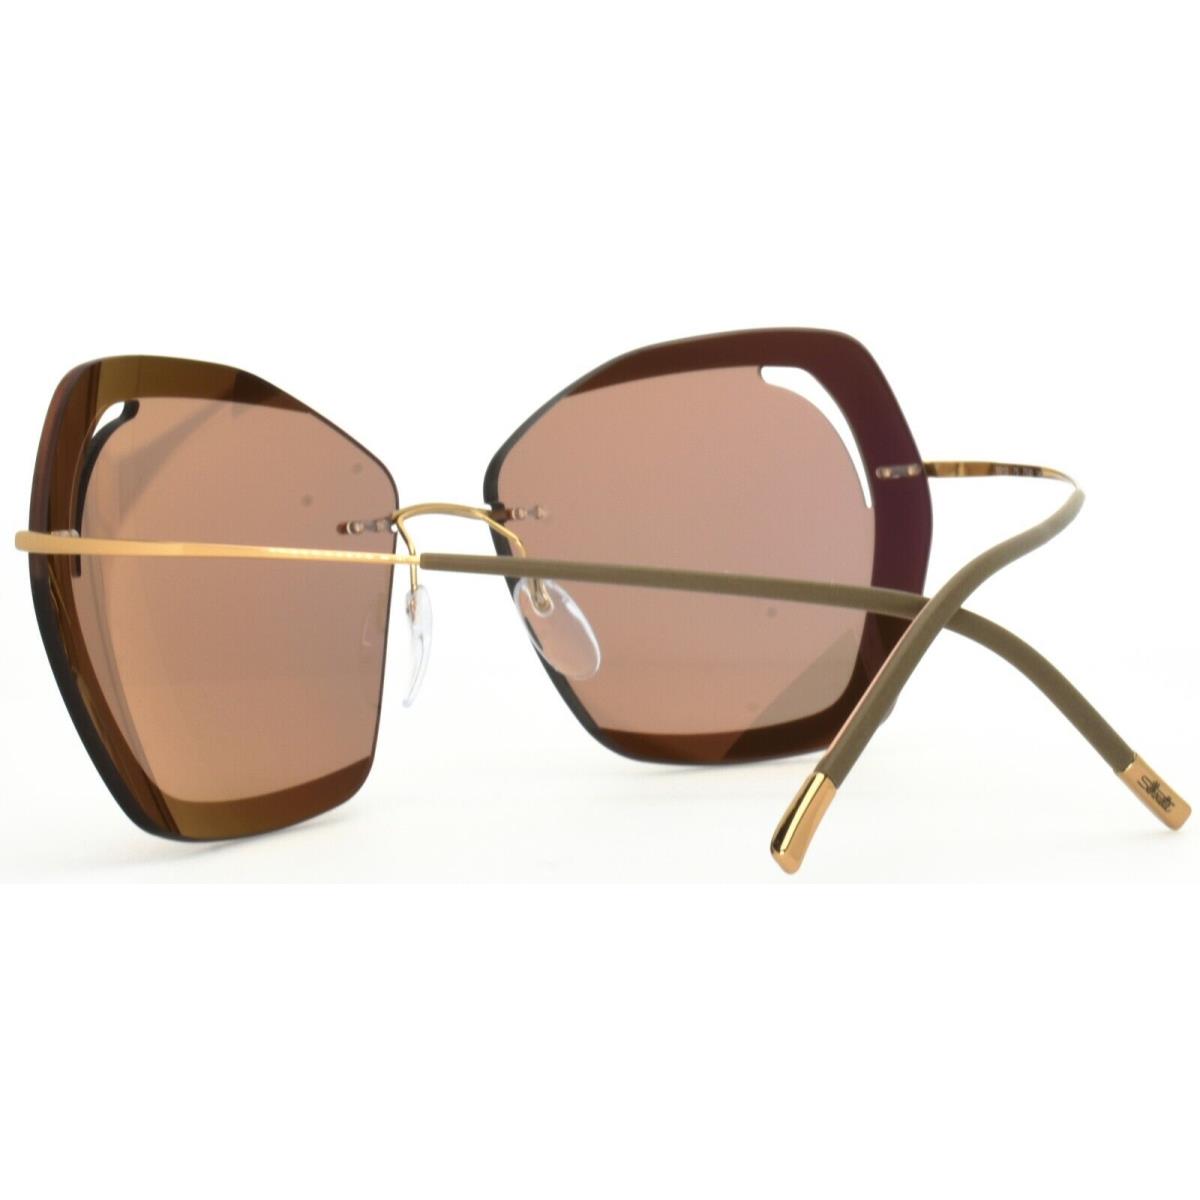 Silhouette sunglasses  - Pink Frame